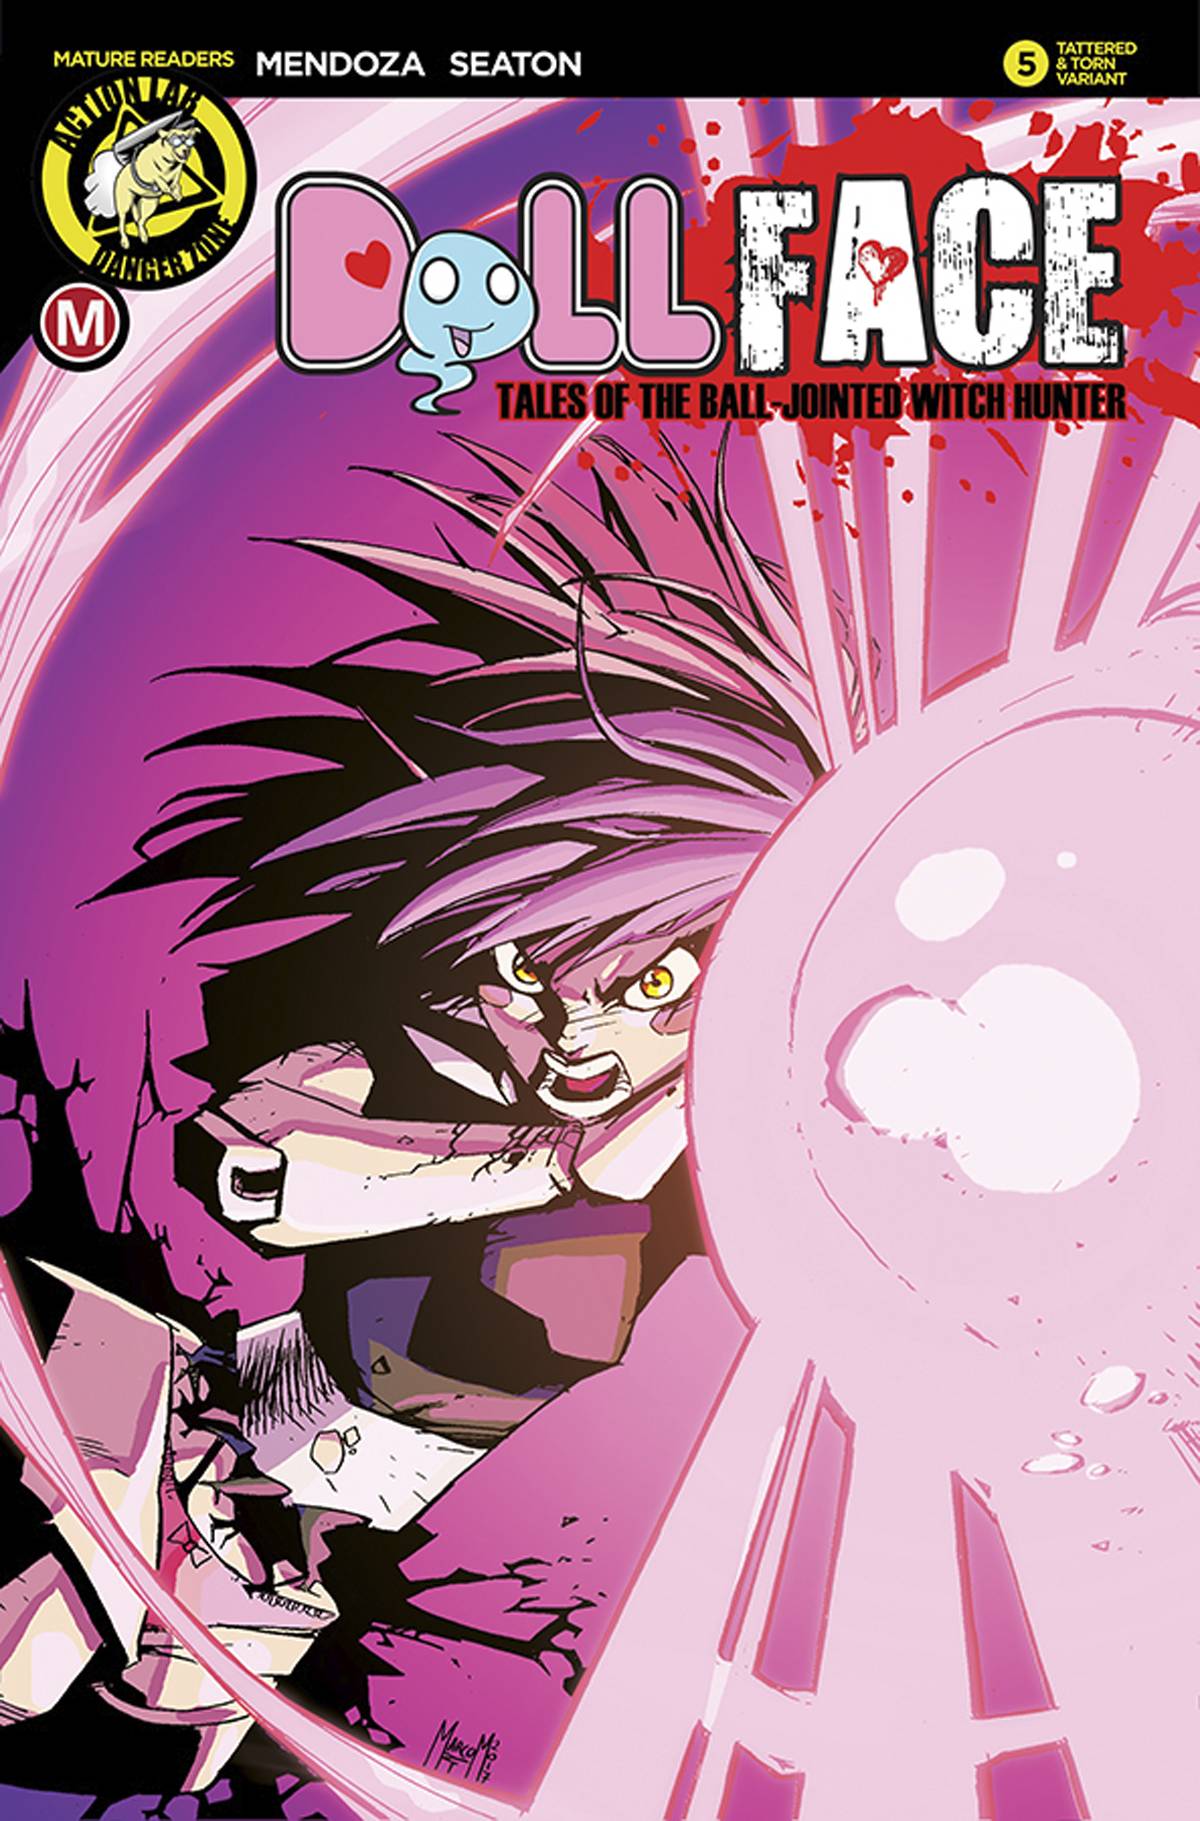 Dollface #6 Cover D Maccagni Pin Up Tattered & Torn